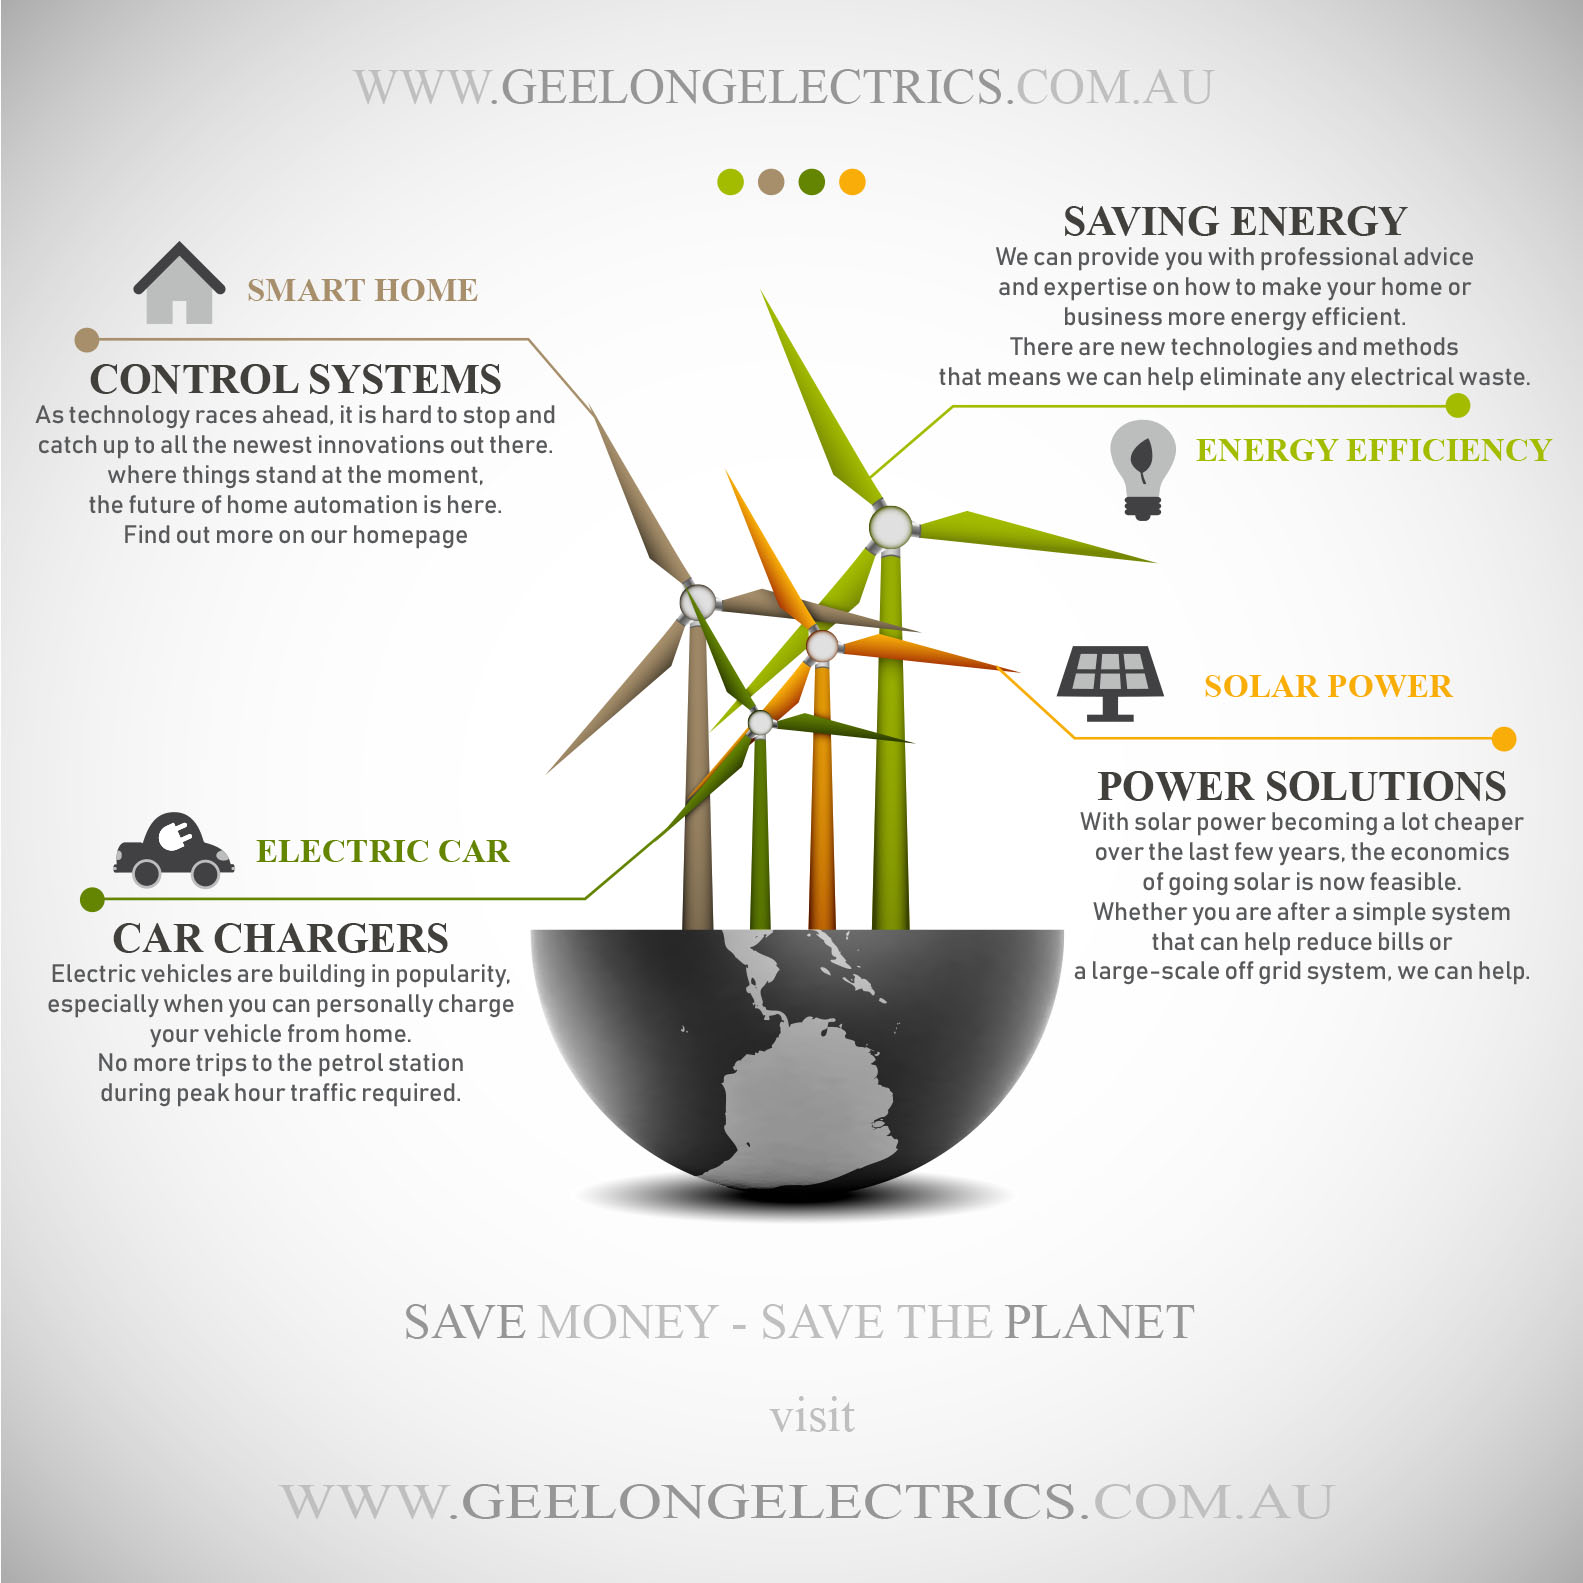 Electric-services-infographic-green-energy-solar-power-smart-home.jpg